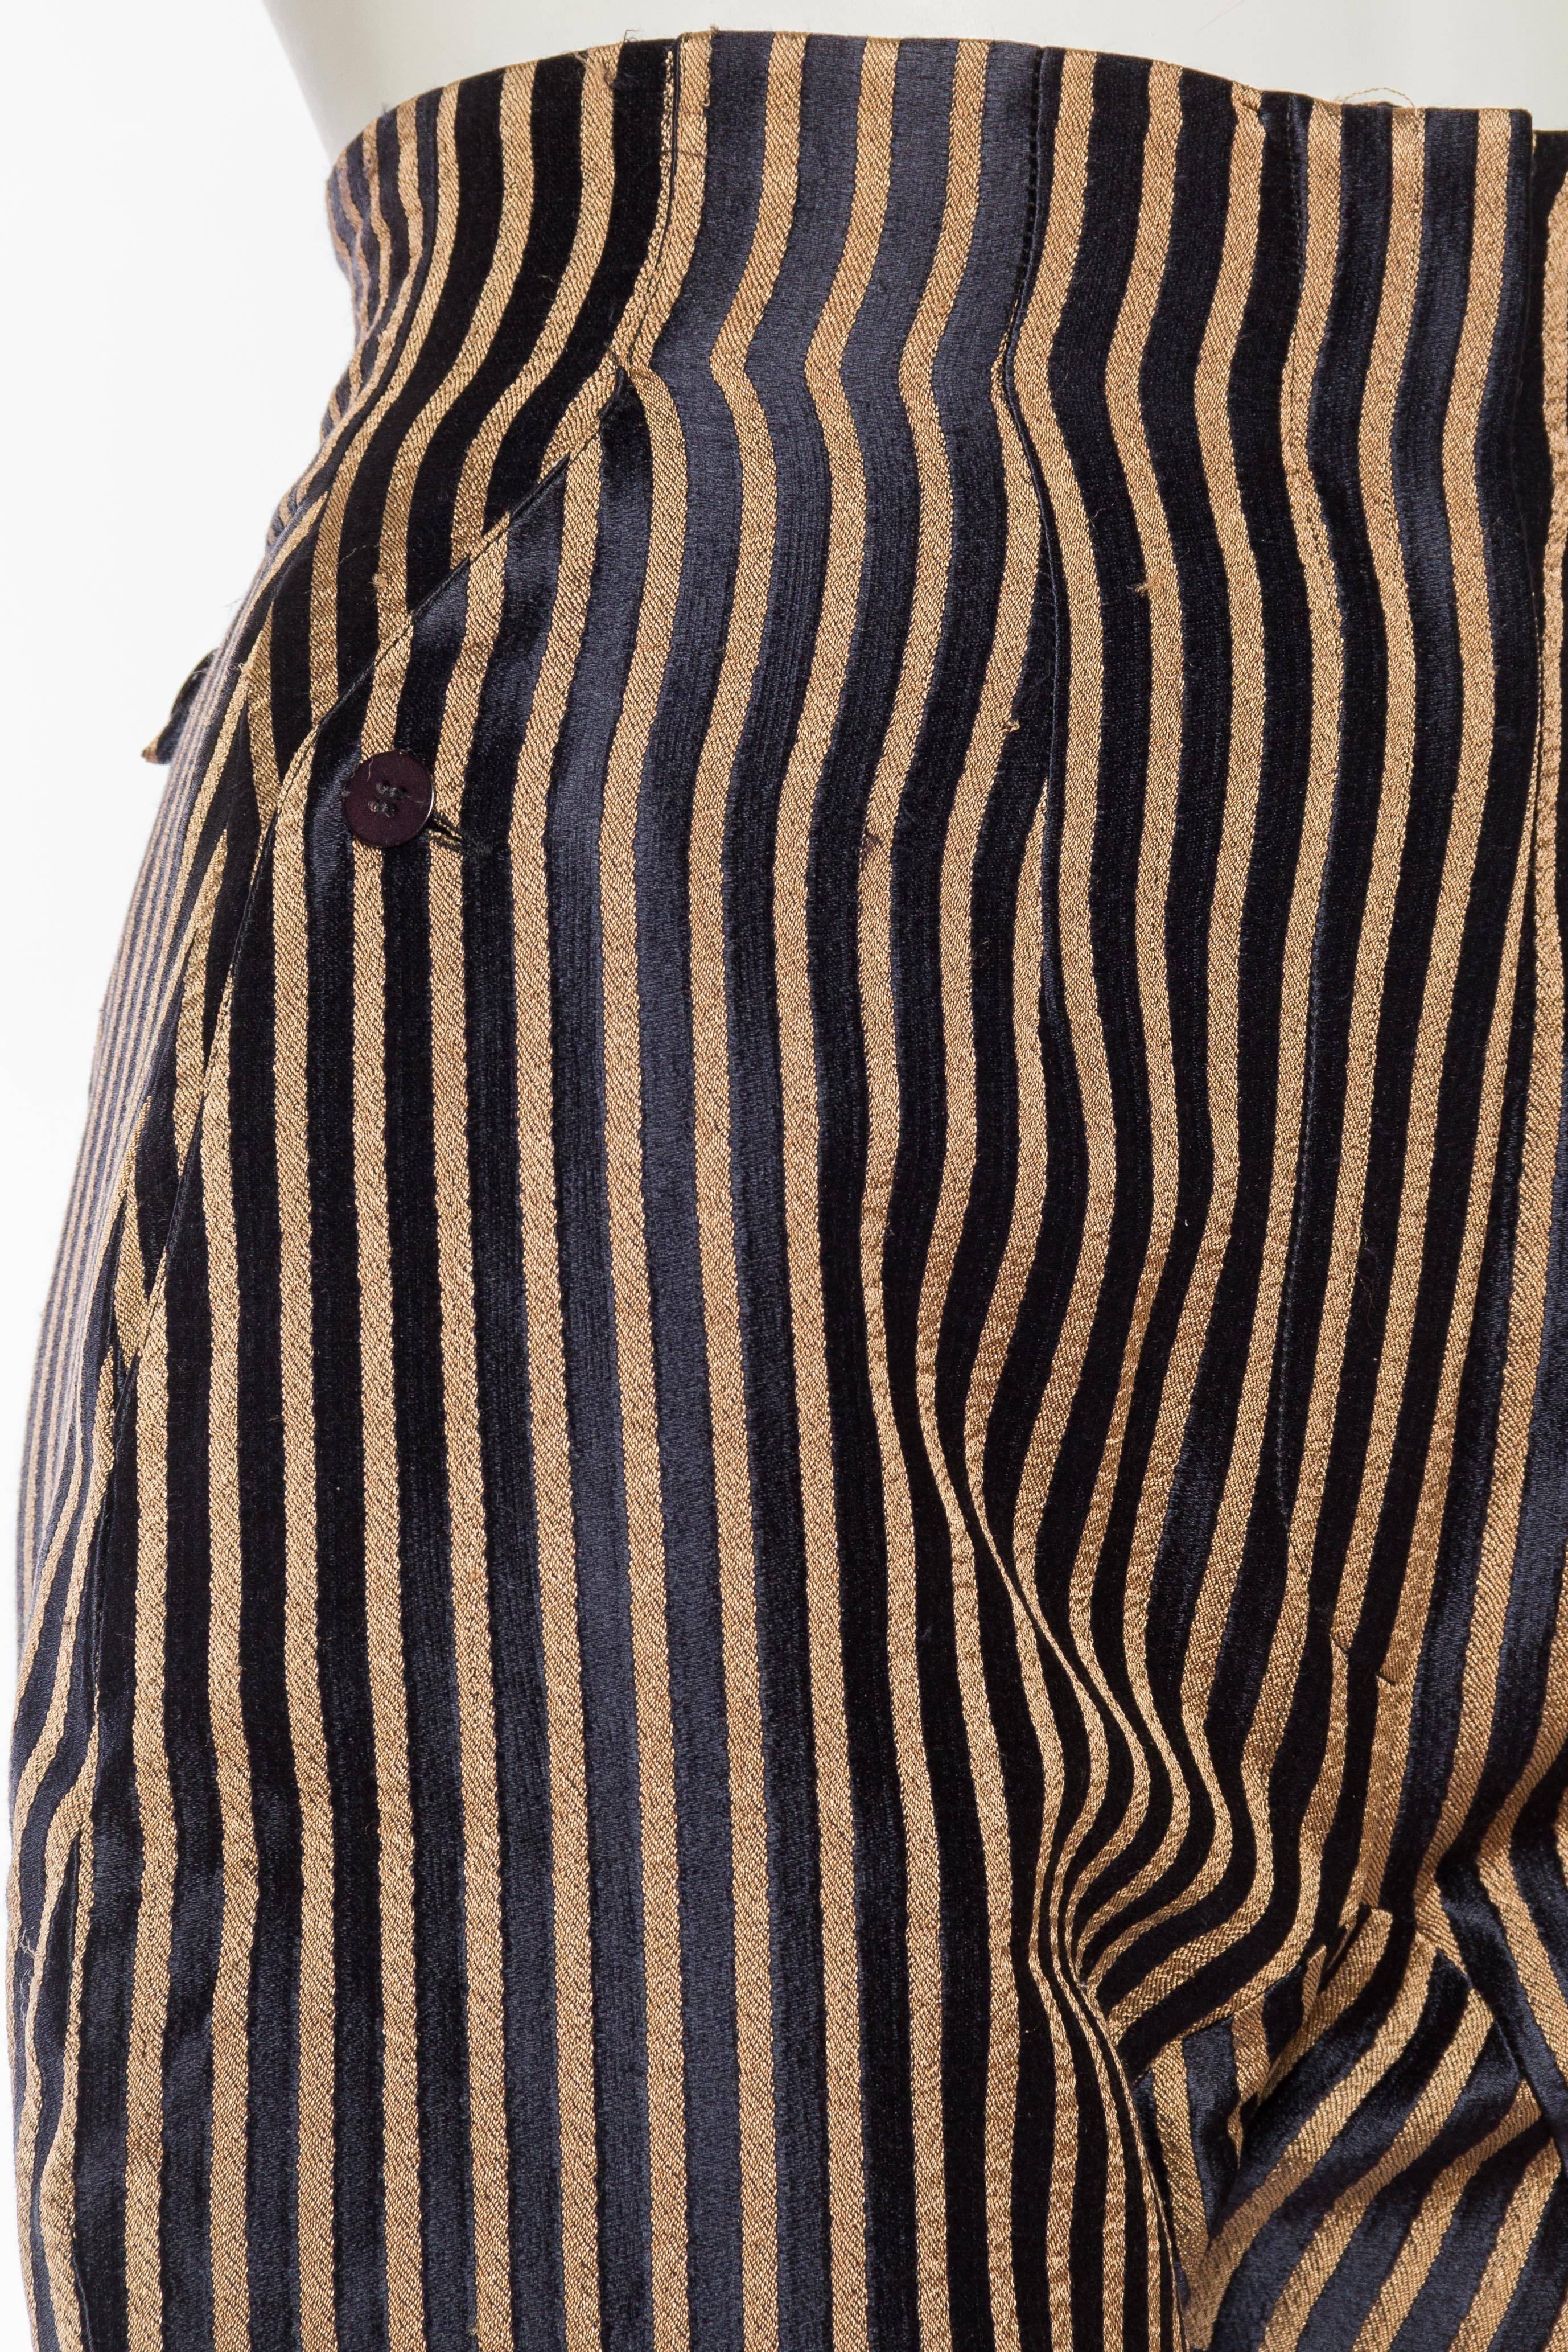 High-Waisted Gianfranco Ferre Silk Striped Trousers 2